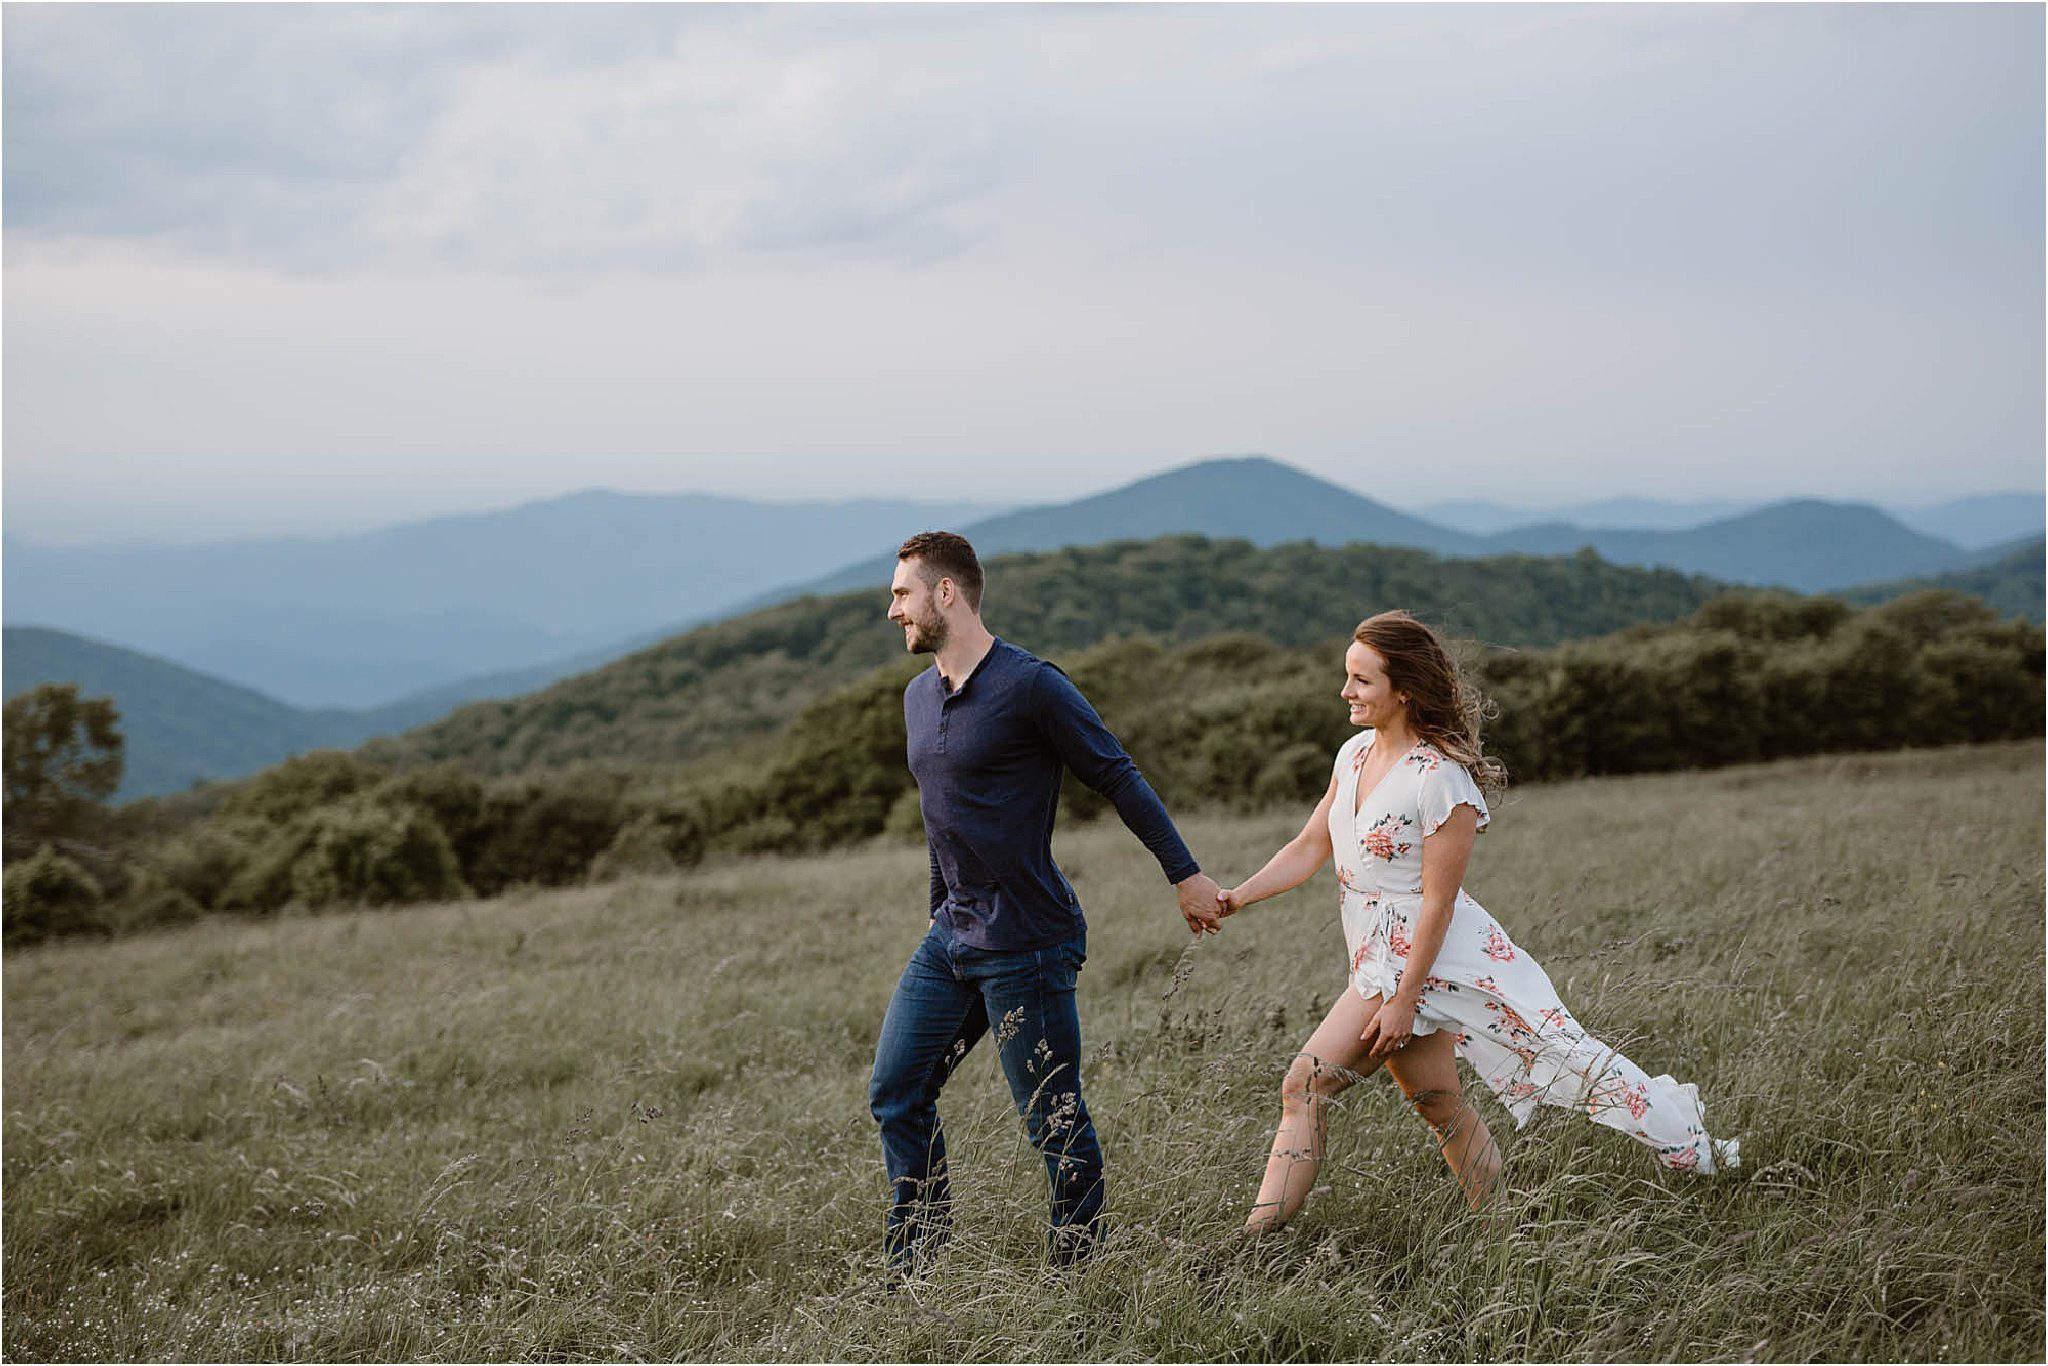 Casual Max Patch Engagement Photos in Tennessee